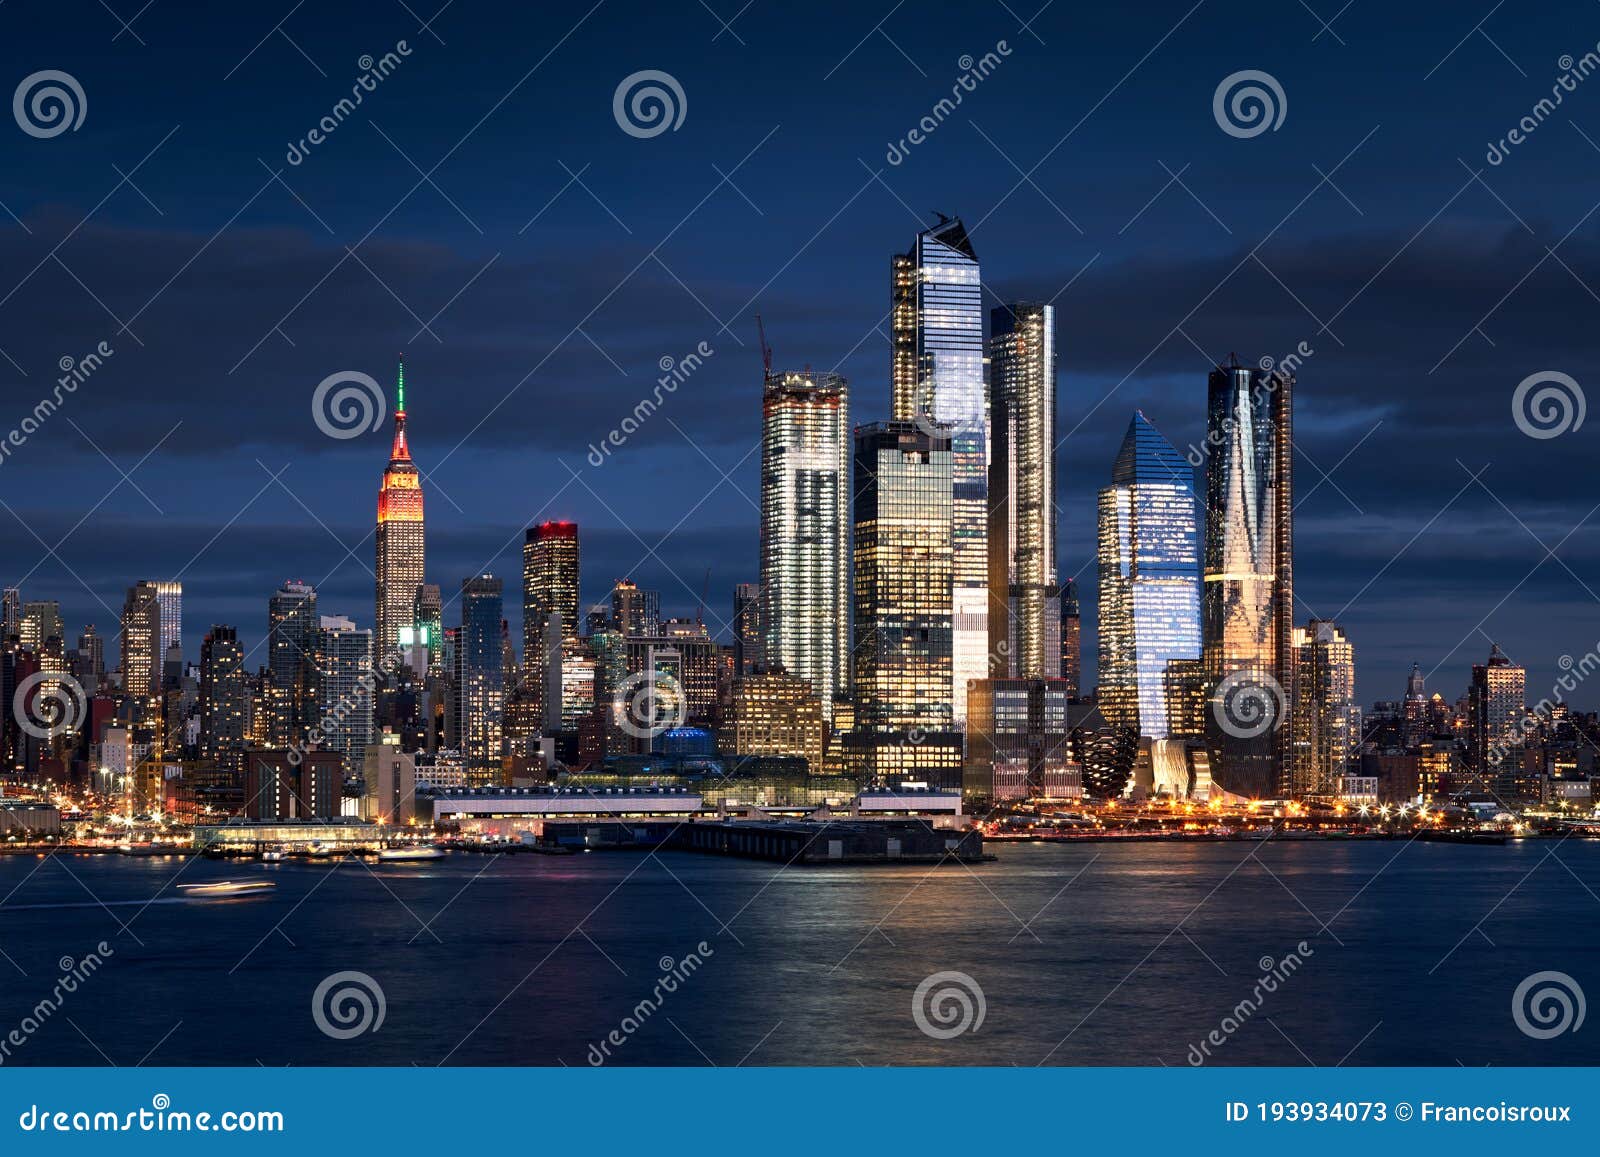 new york city skyline from the hudson river with the skyscrapers of the hudson yards. manhattan midtown west